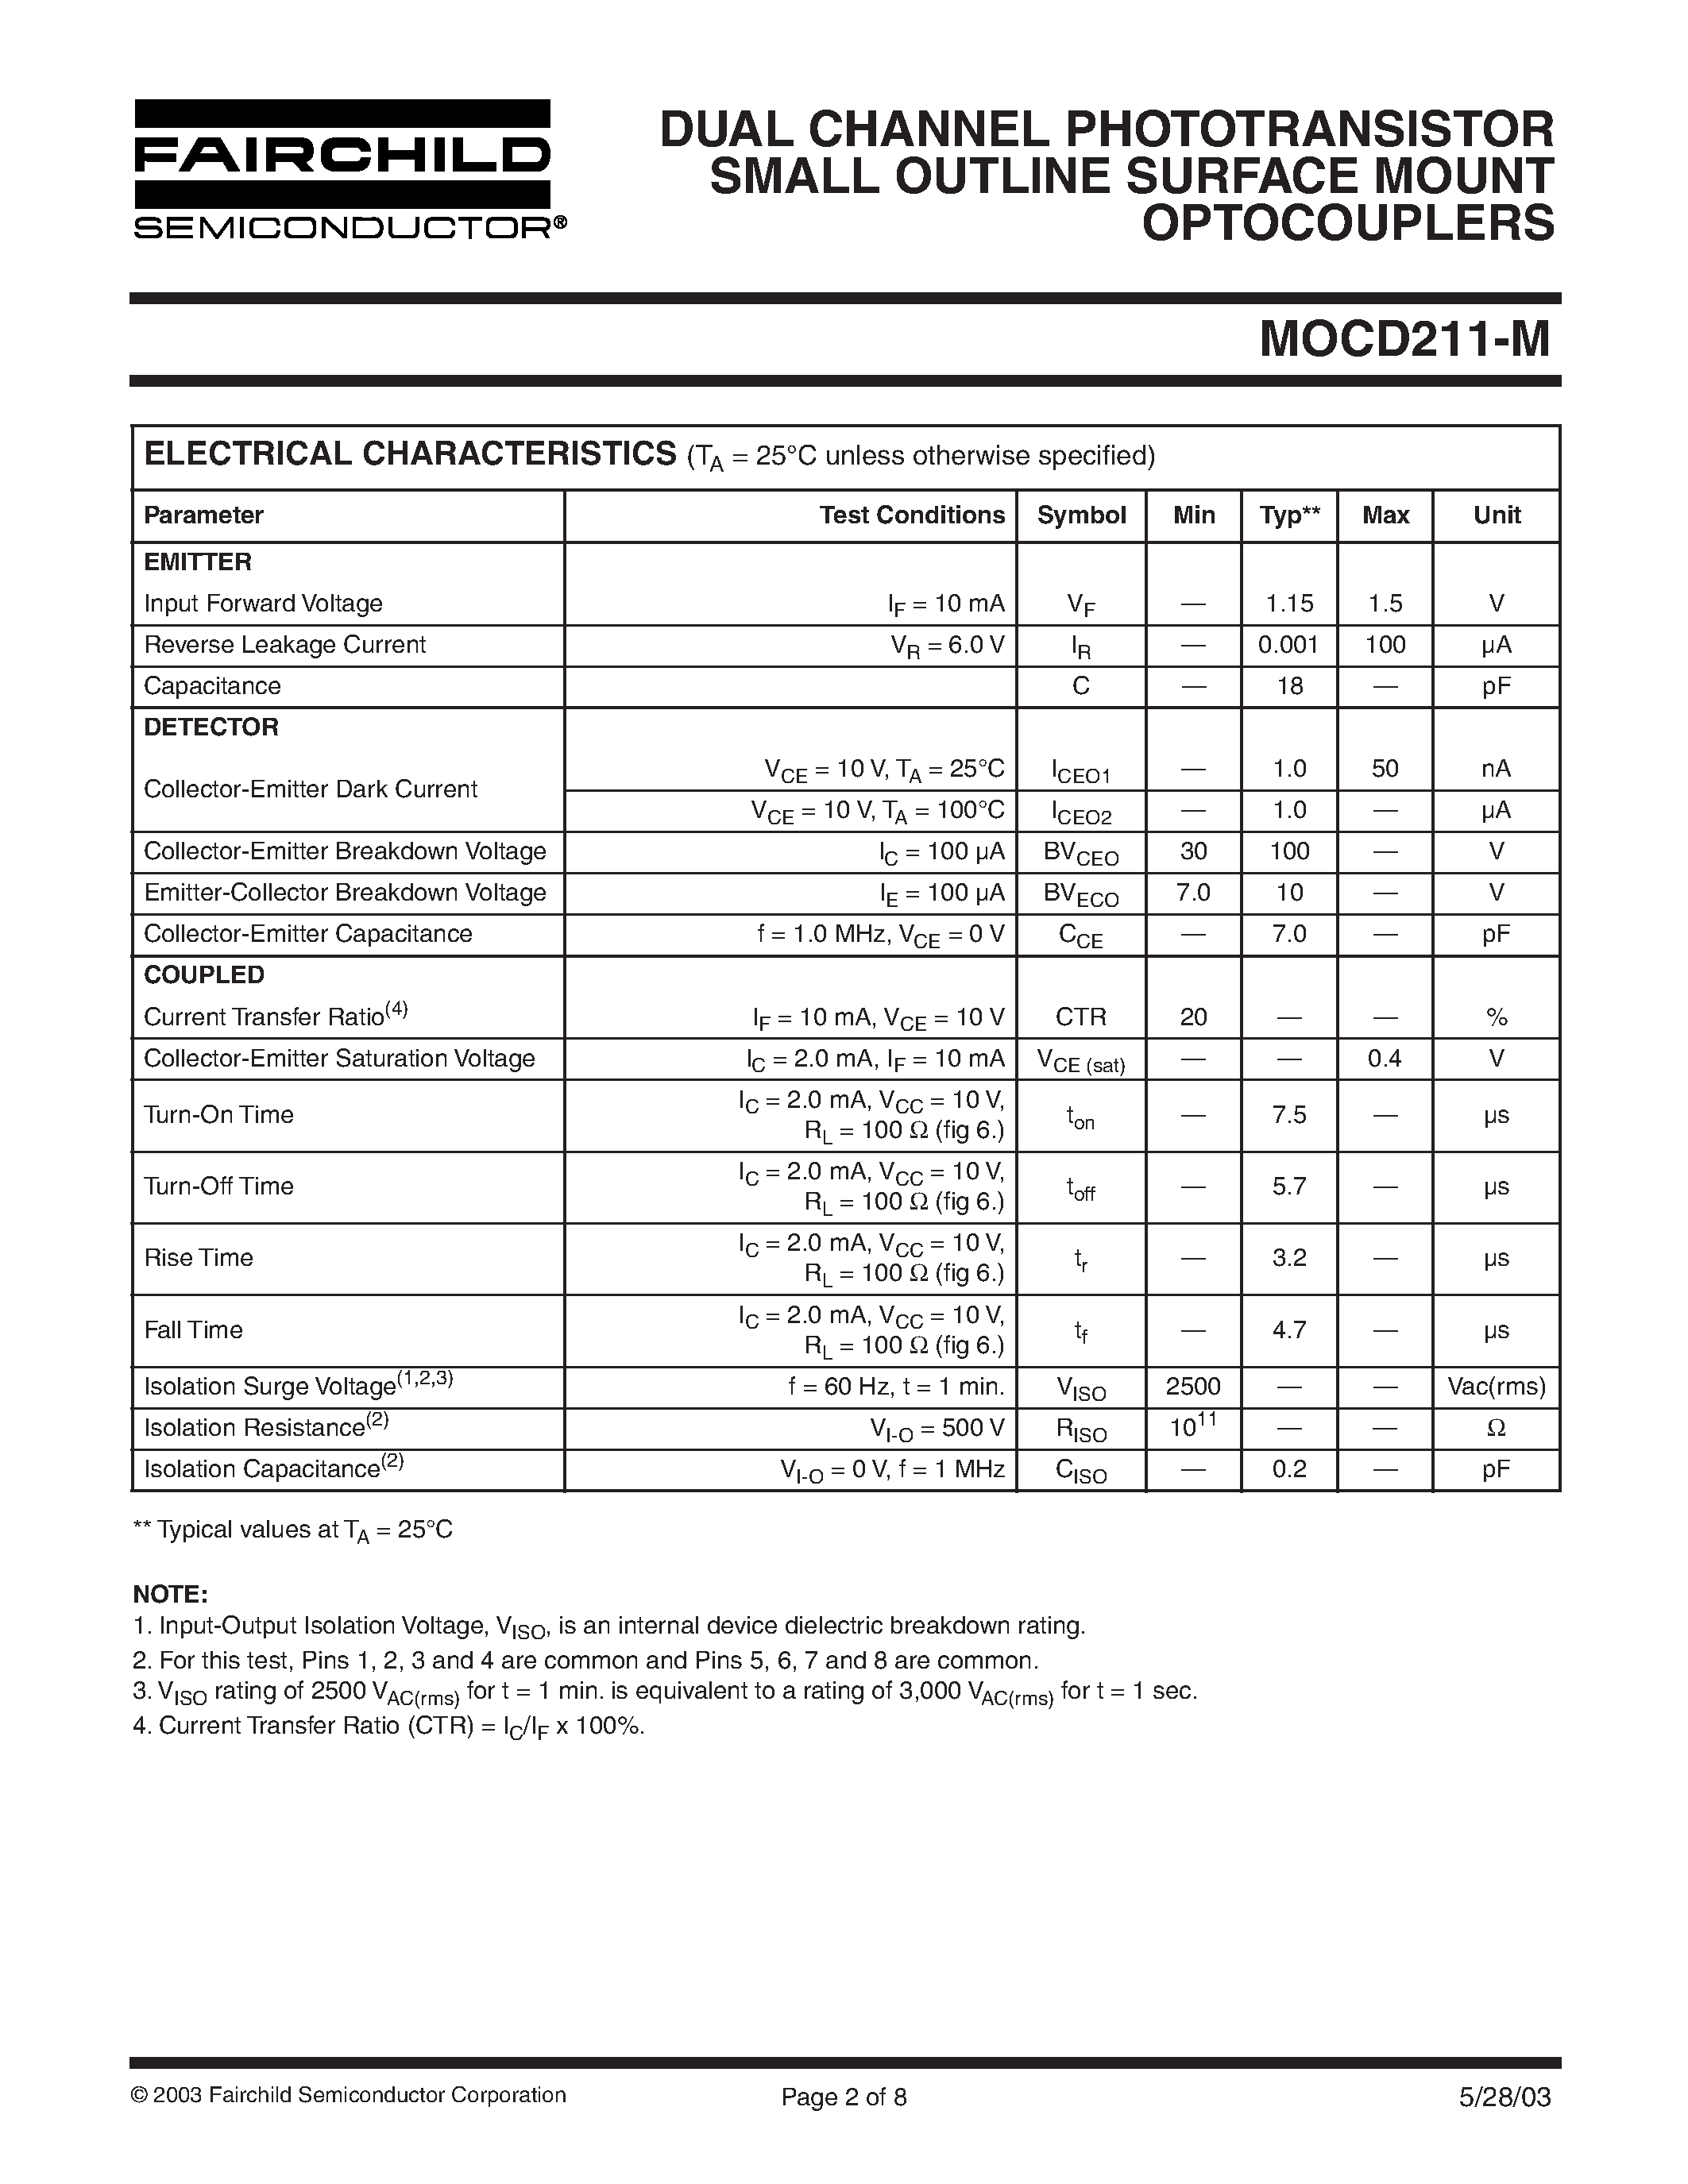 Datasheet MOCD211-M - DUAL CHANNEL PHOTOTRANSISTOR SMALL OUTLINE SURFACE MOUNT OPTOCOUPLERS page 2